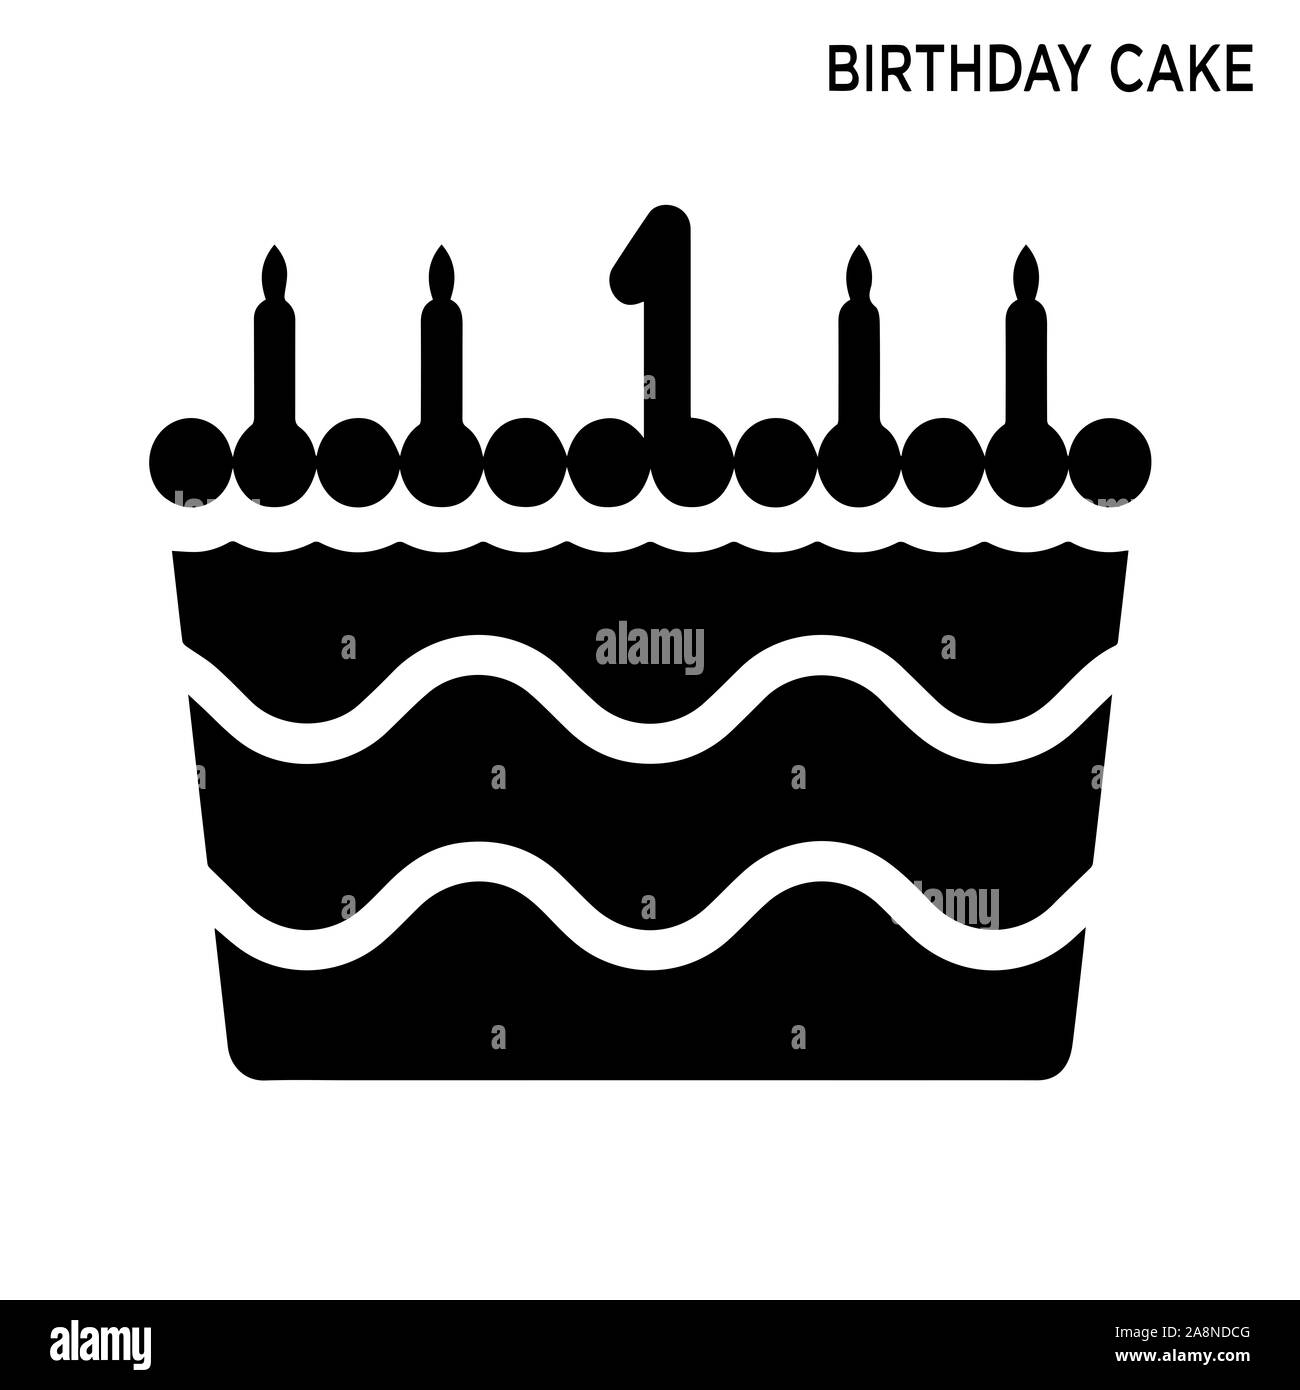 The birthday cake one candle icon white background simple element illustration food concept symbol object Stock Photo